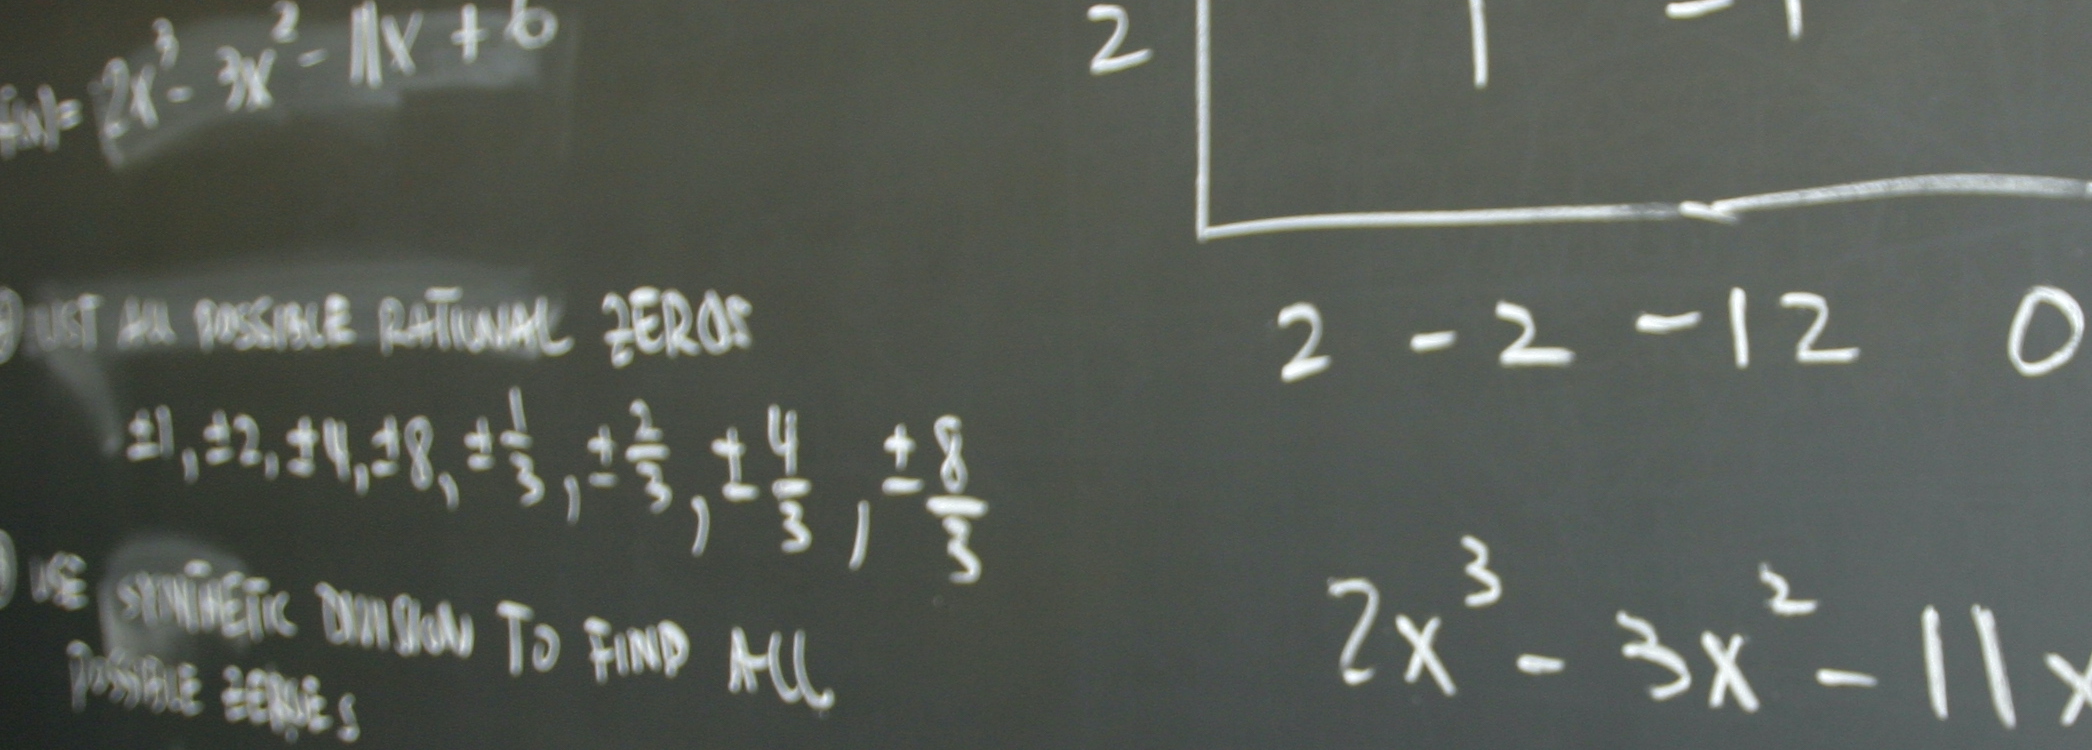 Chalkboard with math equations